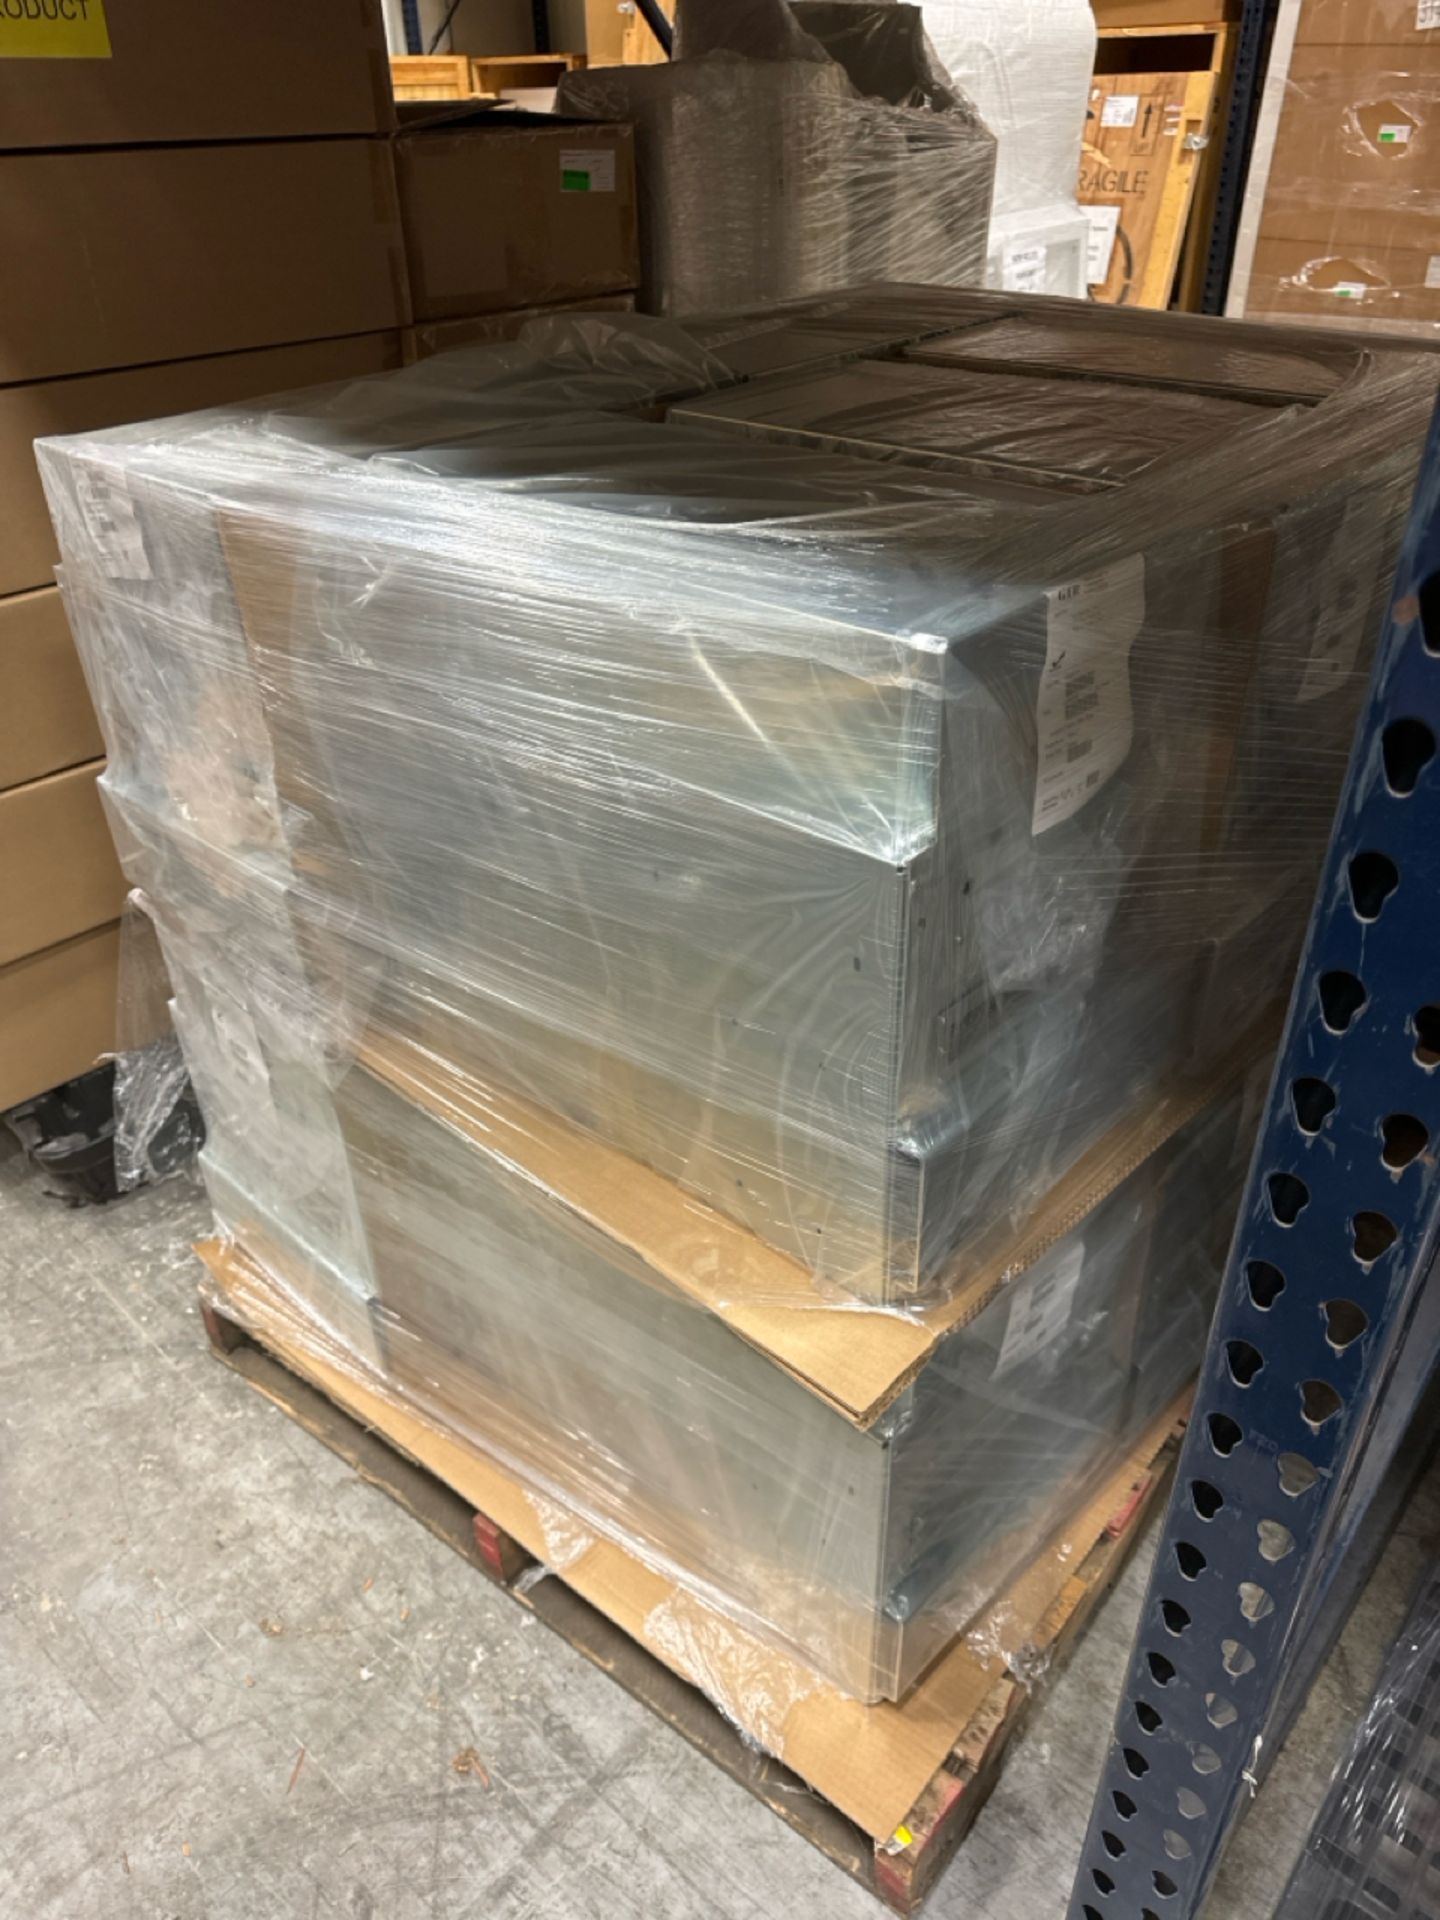 Contents of Center Pallet Racking - Image 21 of 68